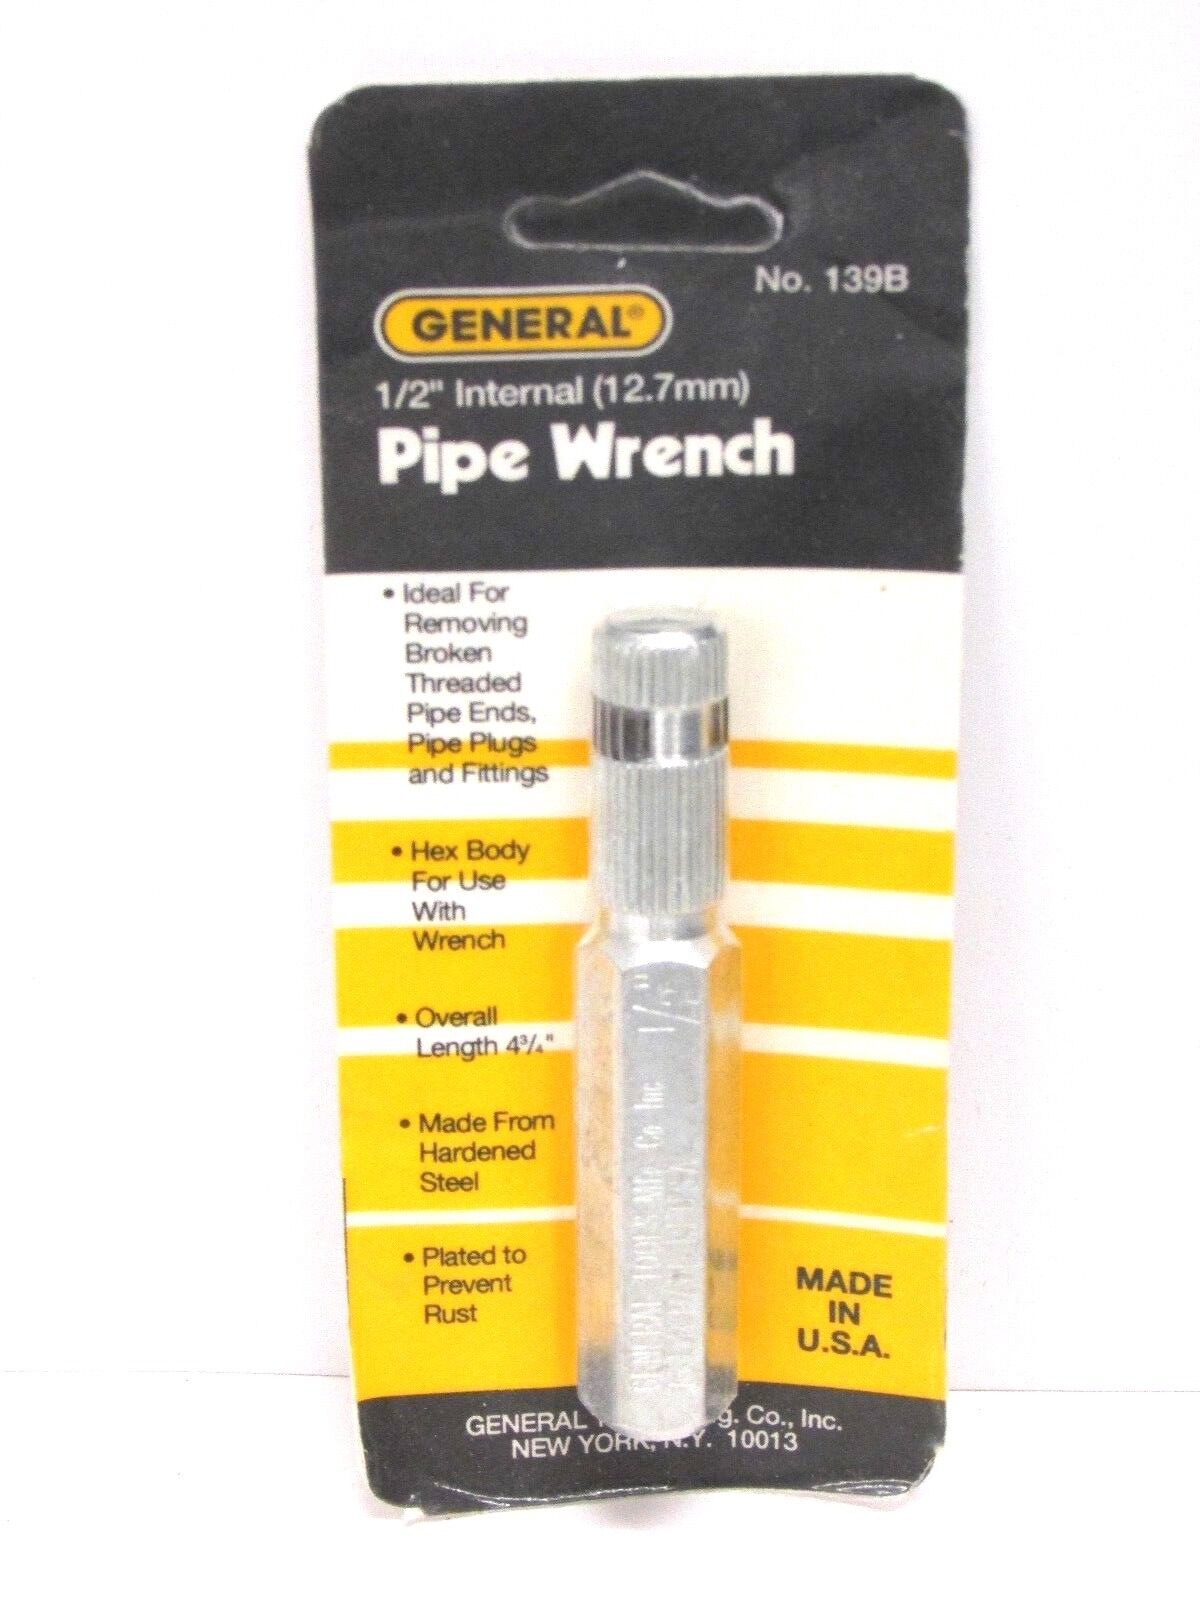 New! General Tools 1/2" Internal Pipe Wrench, No. 139b